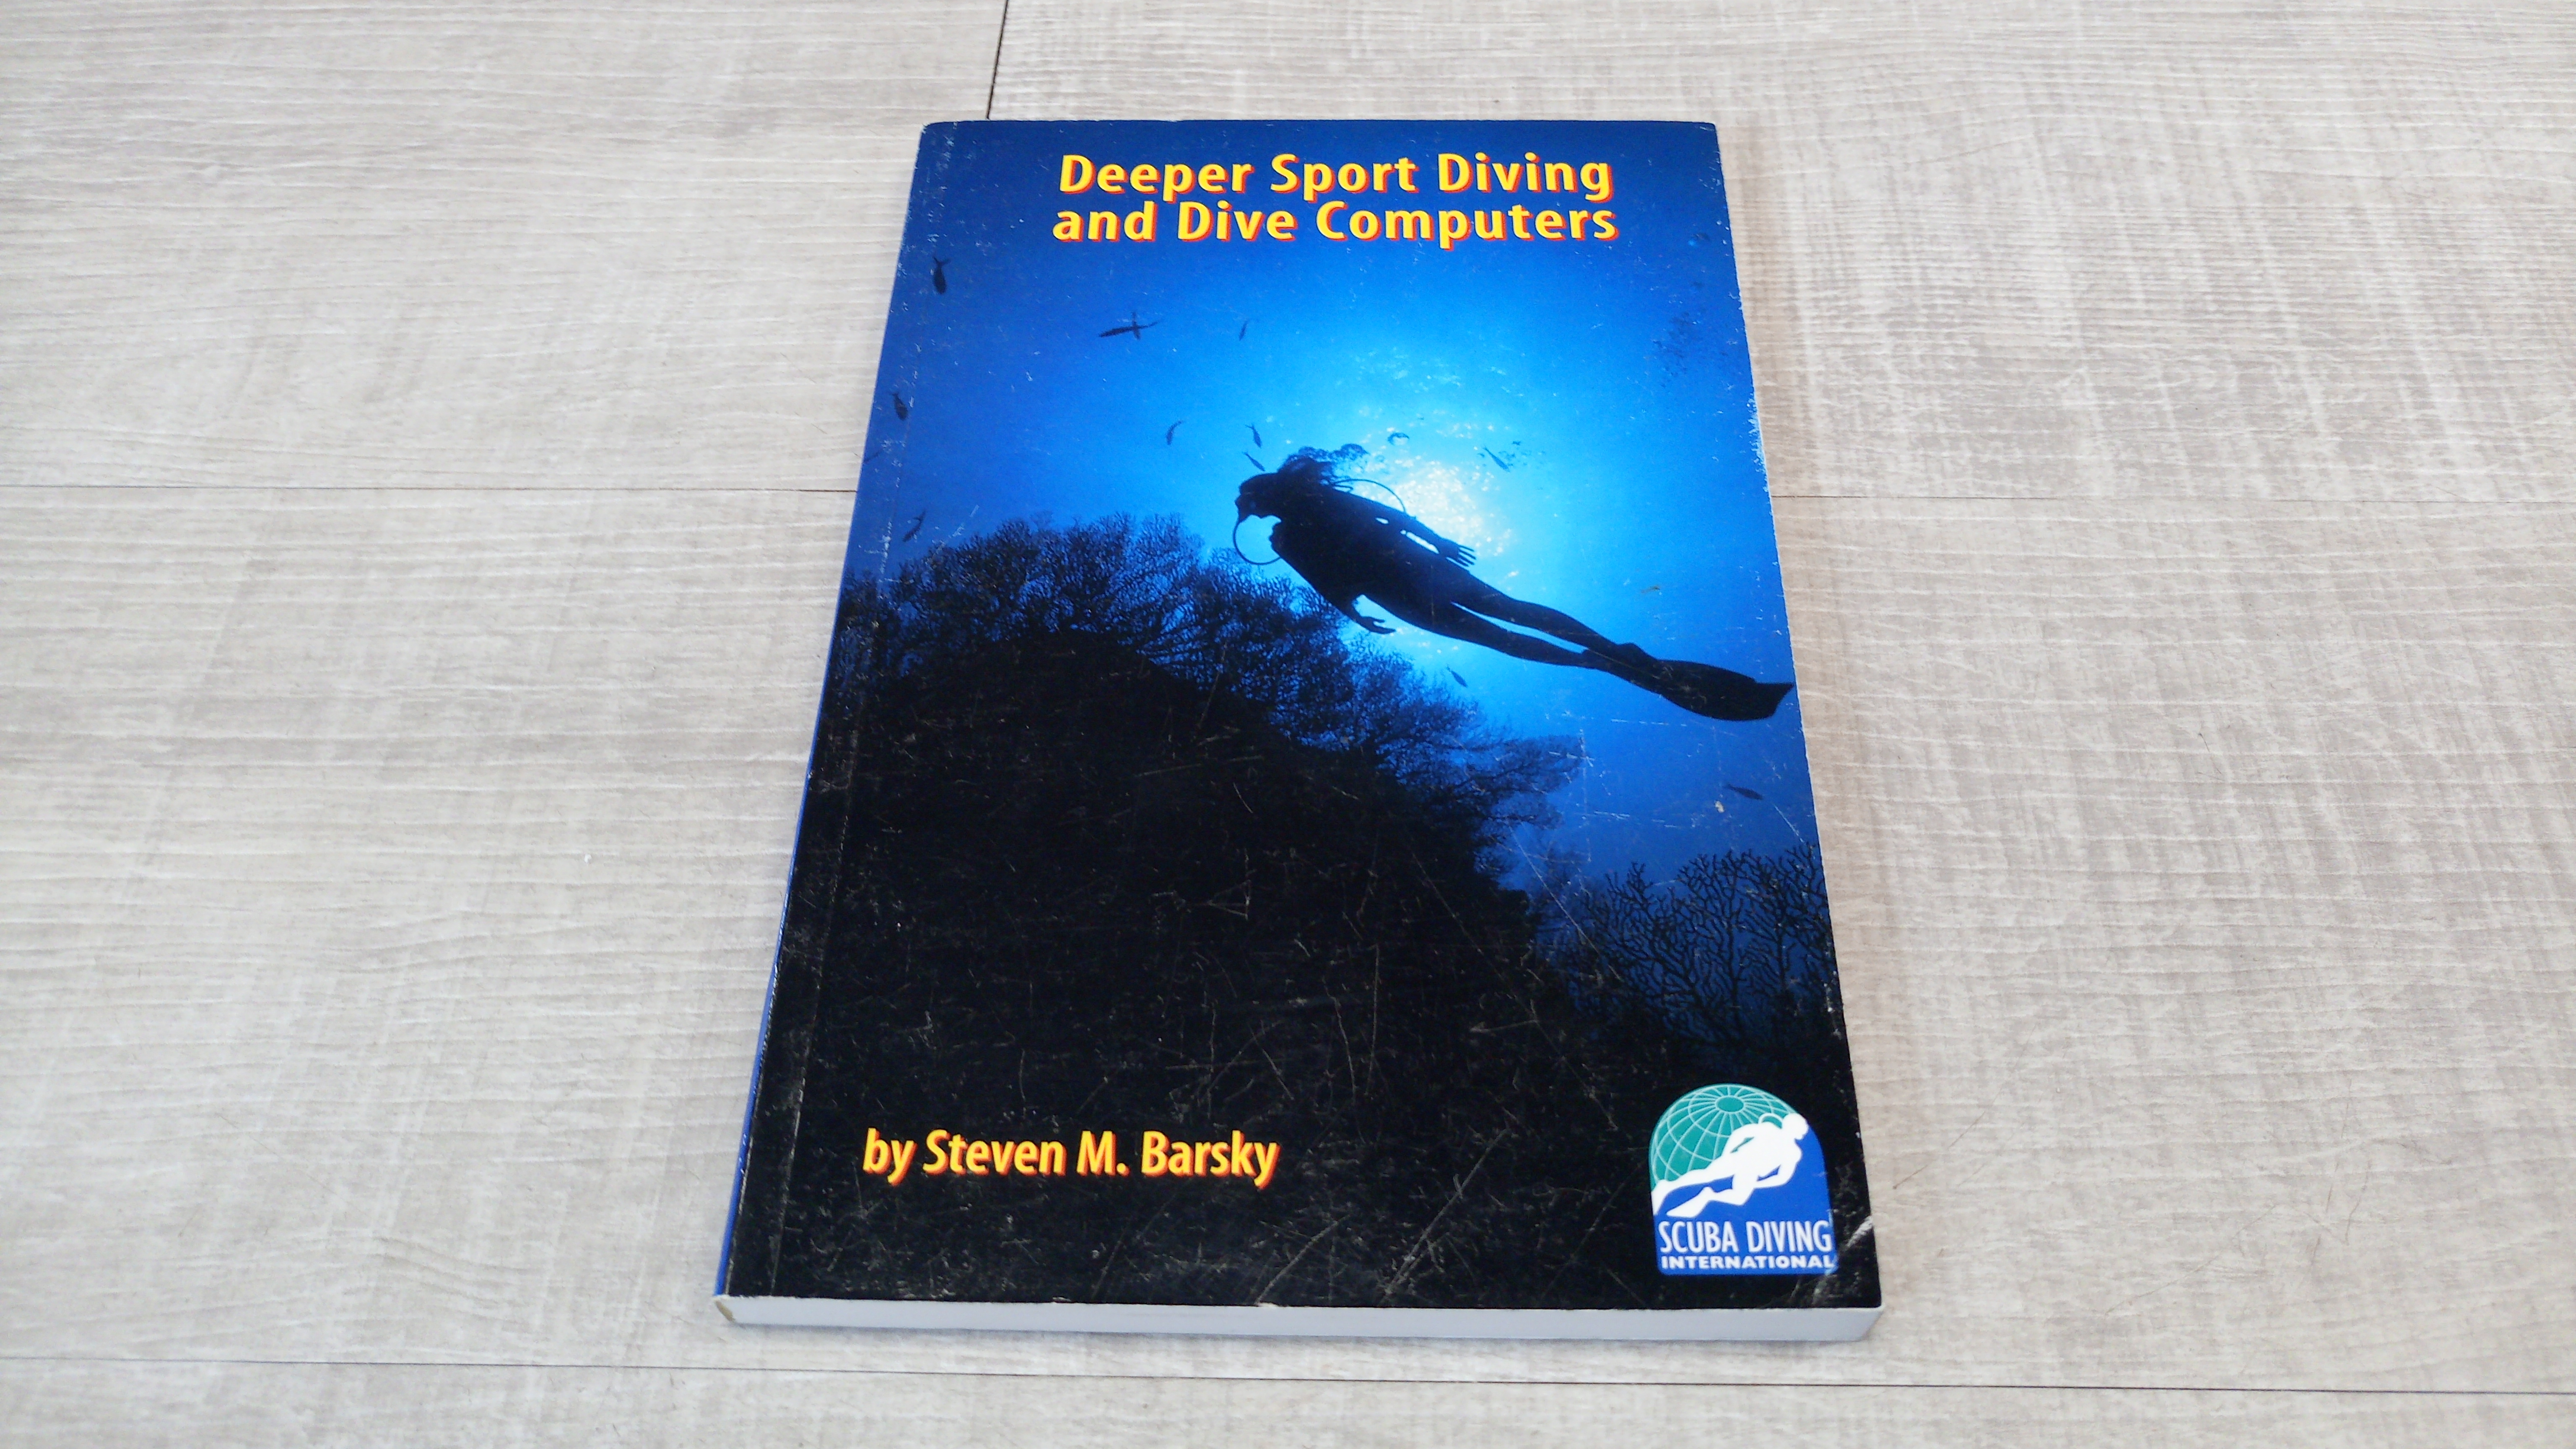 Deeper Sport Diving and Dive Computers